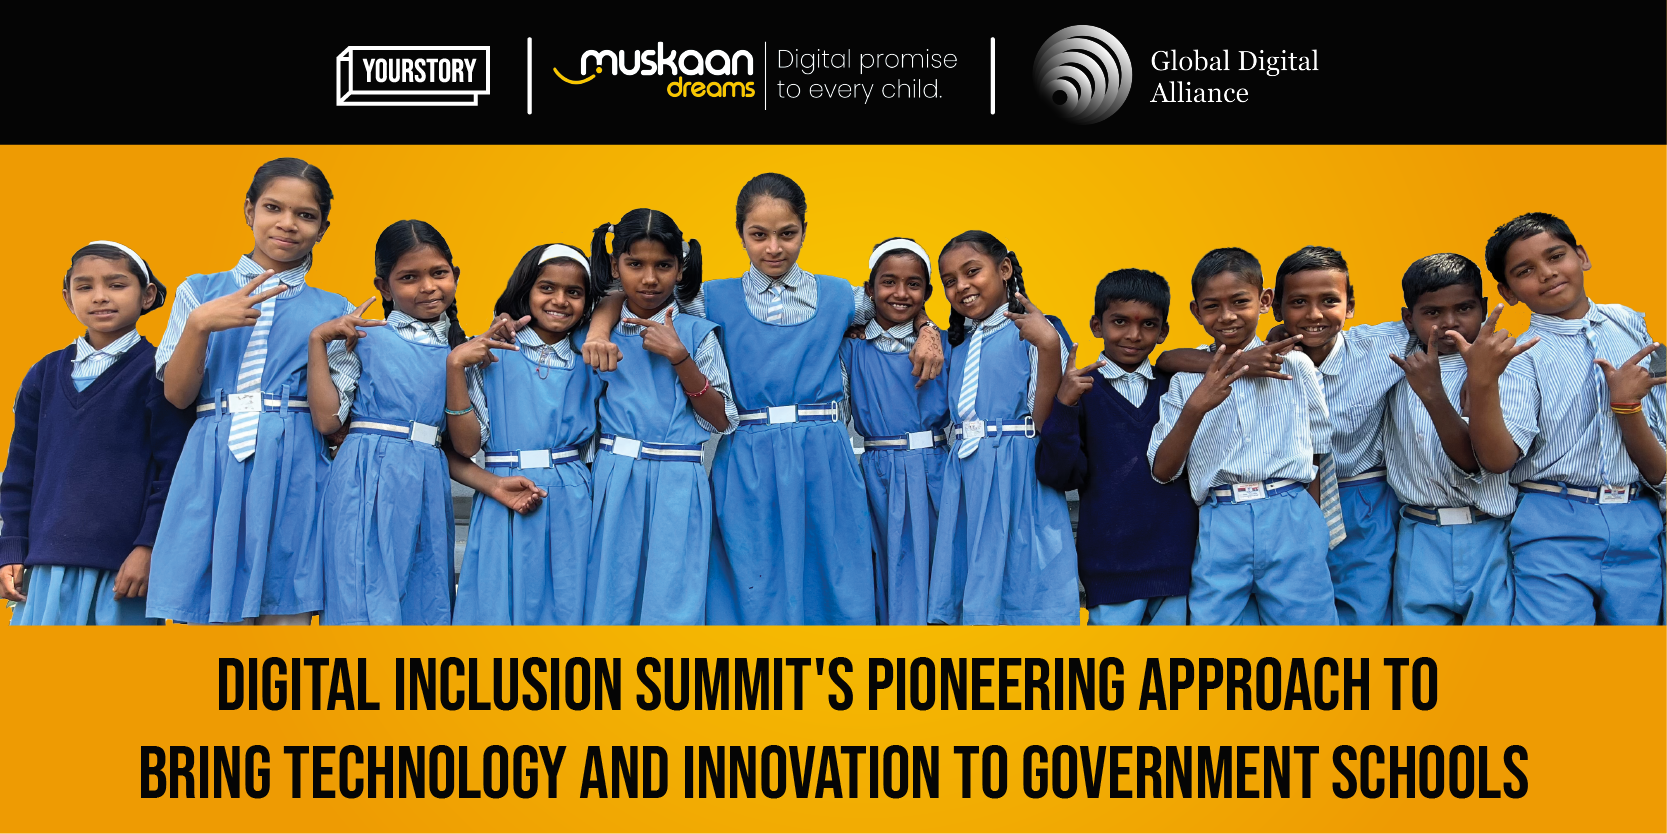 Digital Inclusion Summit's pioneering approach to bring technology and innovation to government schools